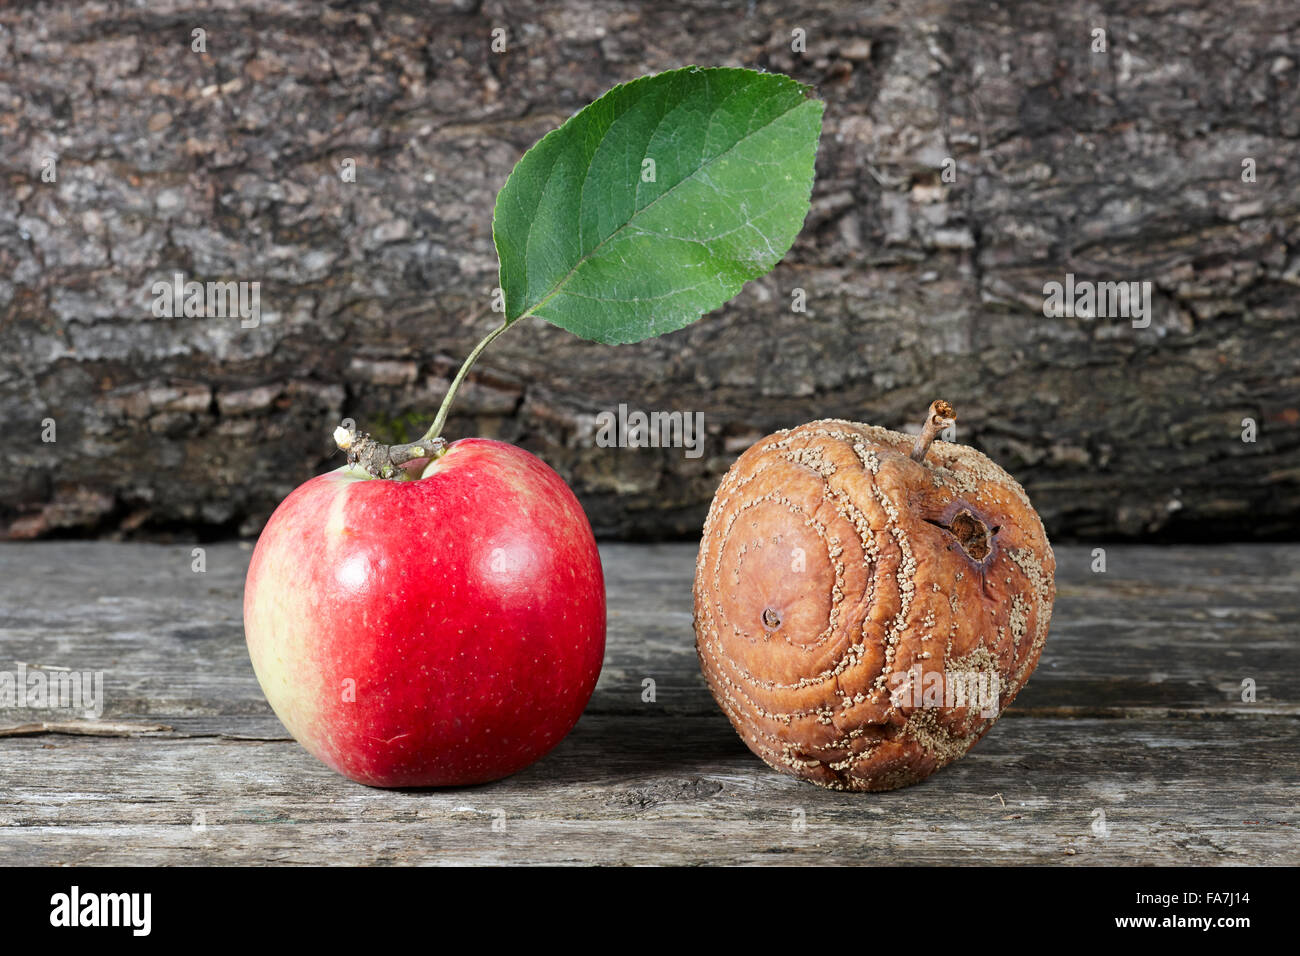 Rotten and a fresh apple put together. Scientific name: Malus domestica. Stock Photo